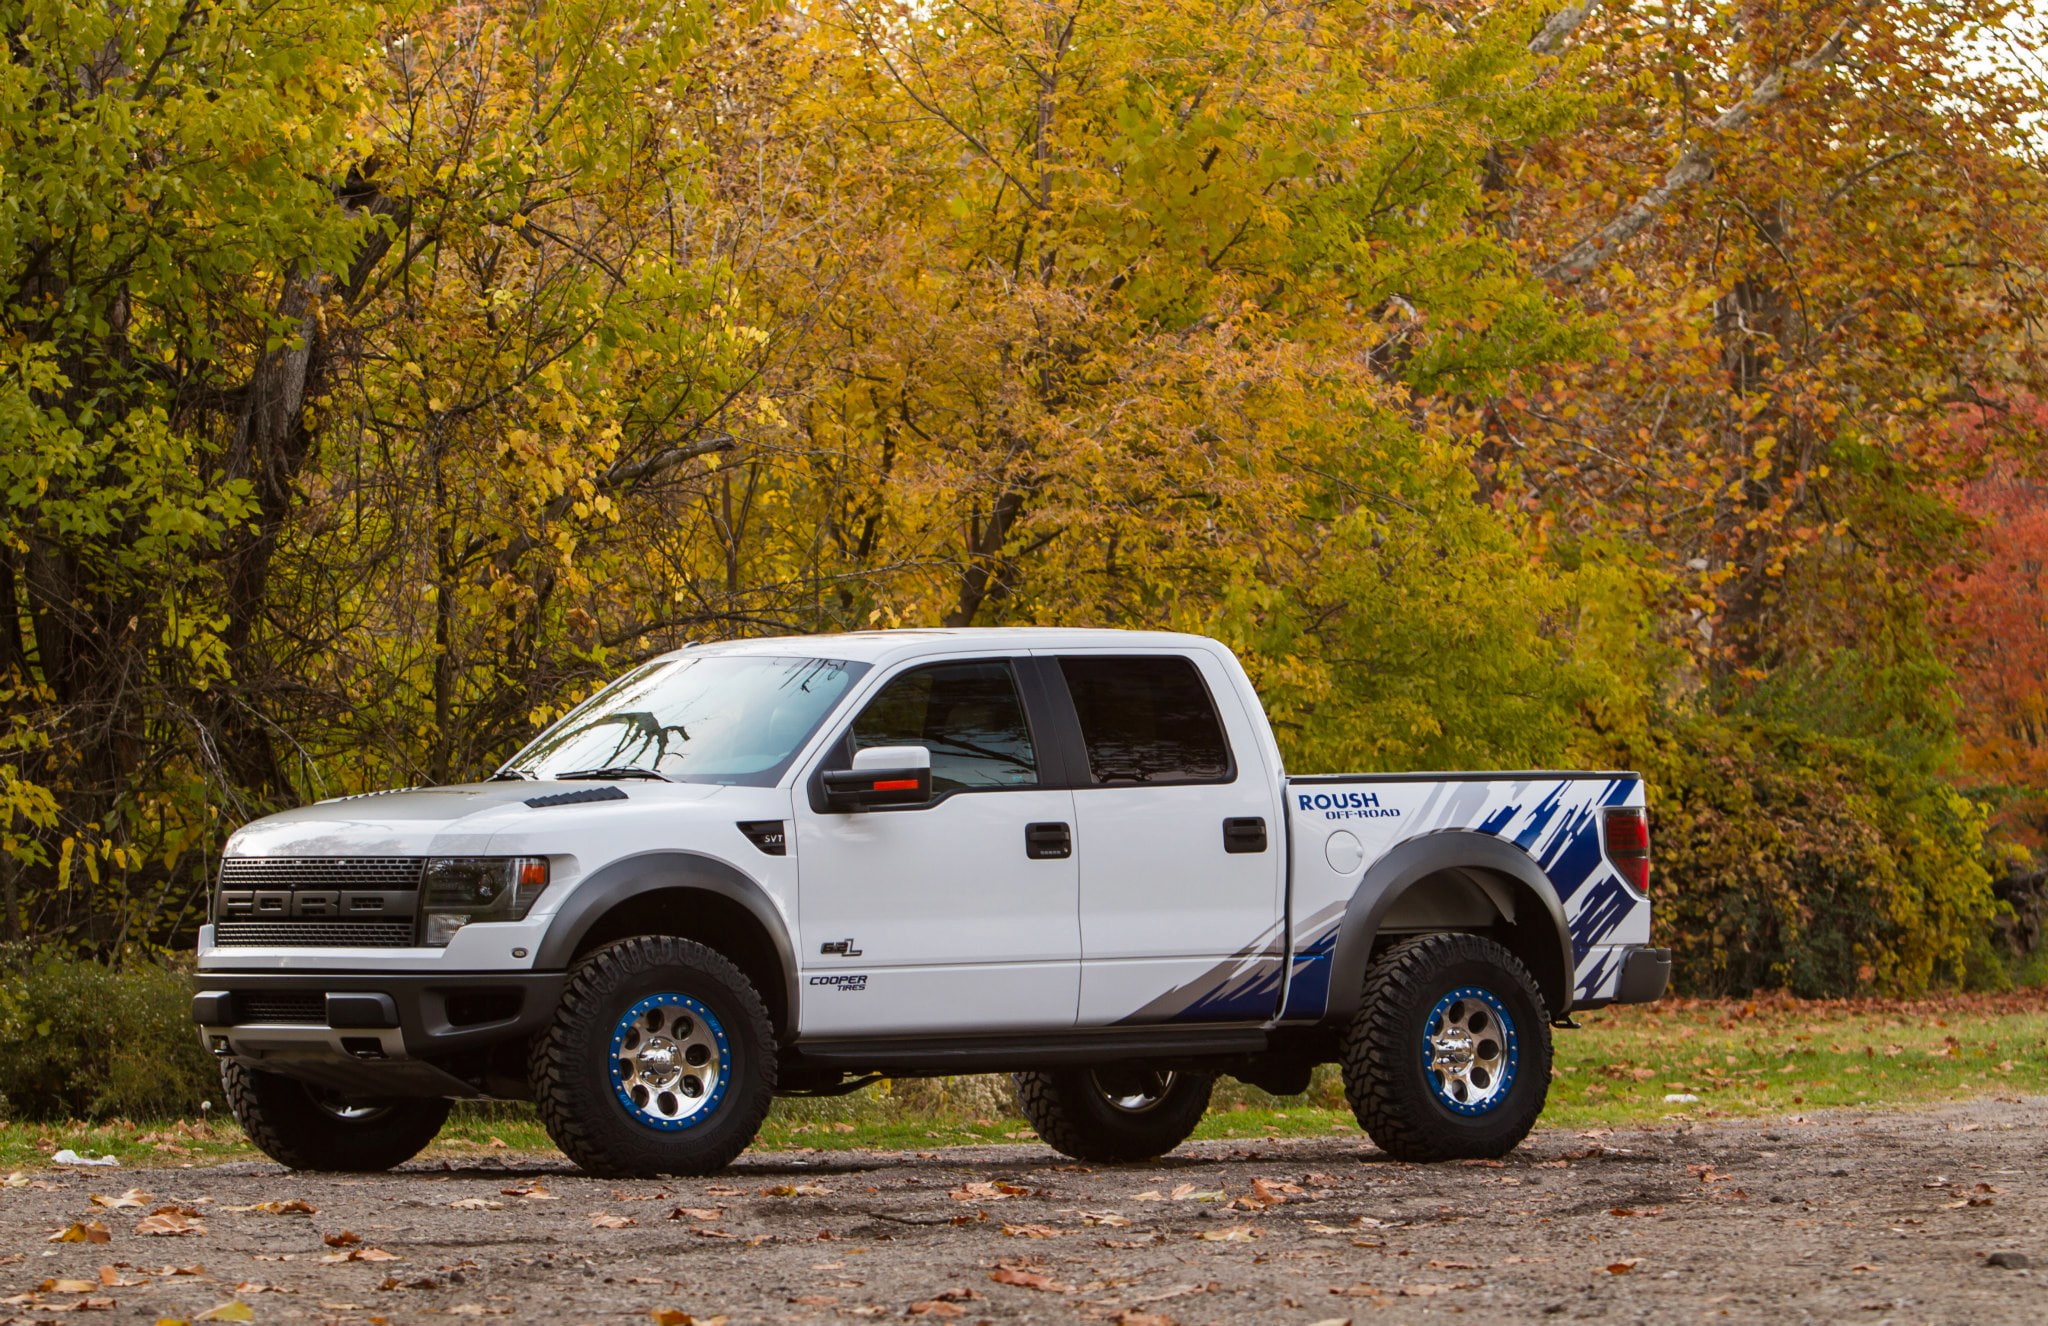 2012, 4x4, ford, offroad, performance, phase 2, raptor, roush